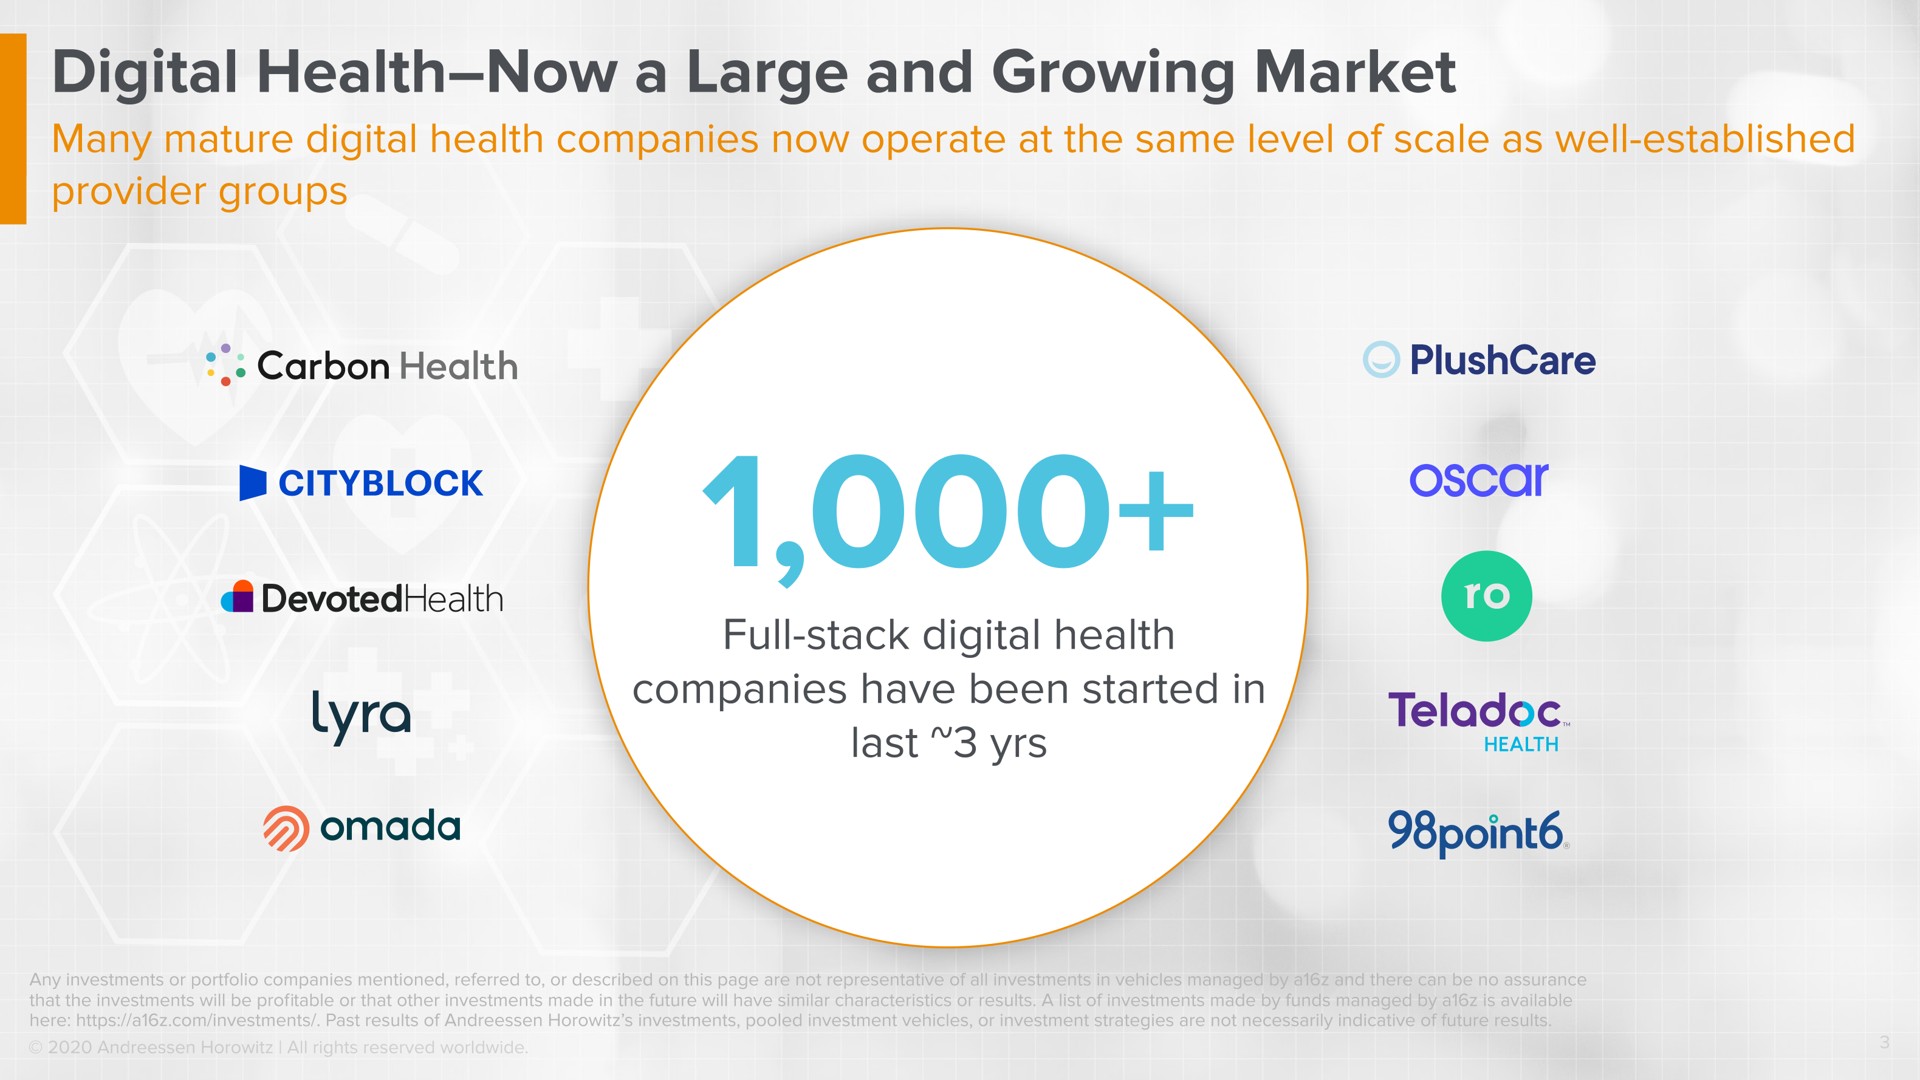 digital health now a large and growing market point | a16z